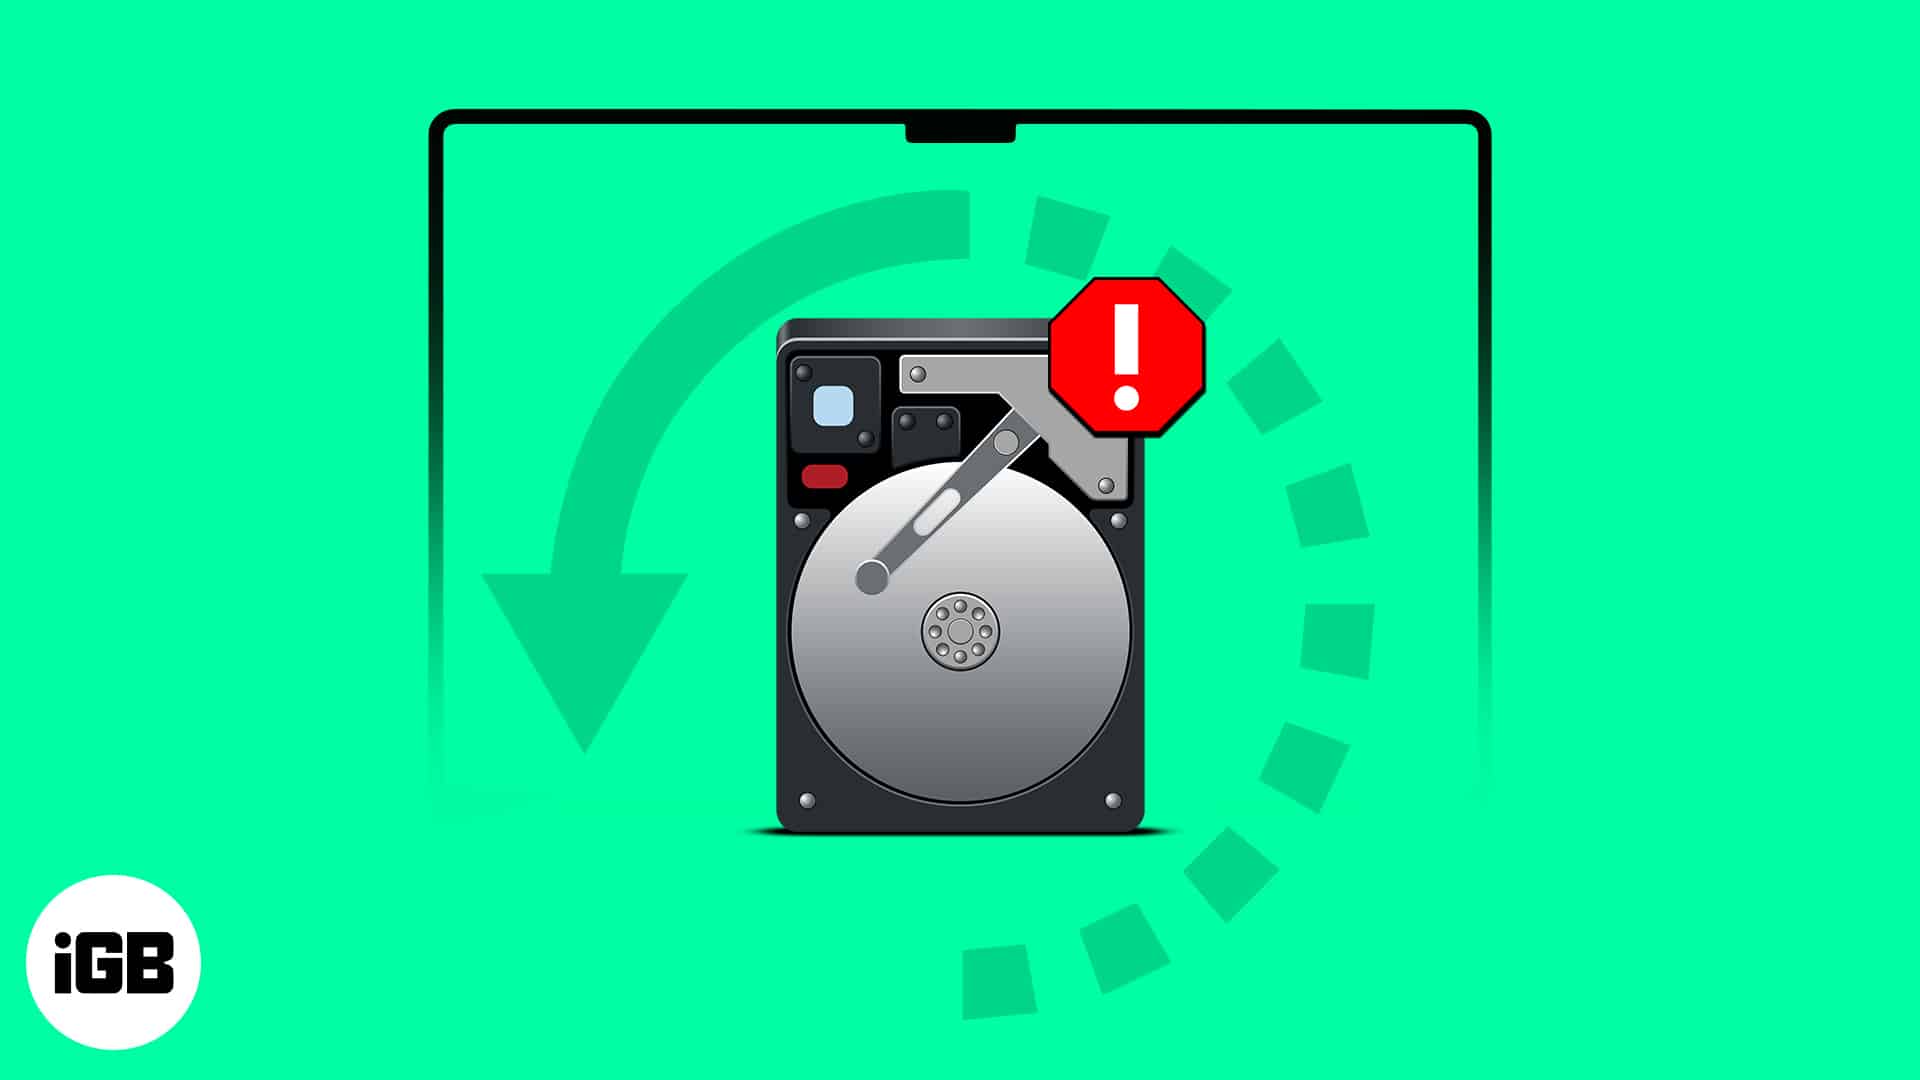 How to fix corrupted hard drive and recover data on Mac